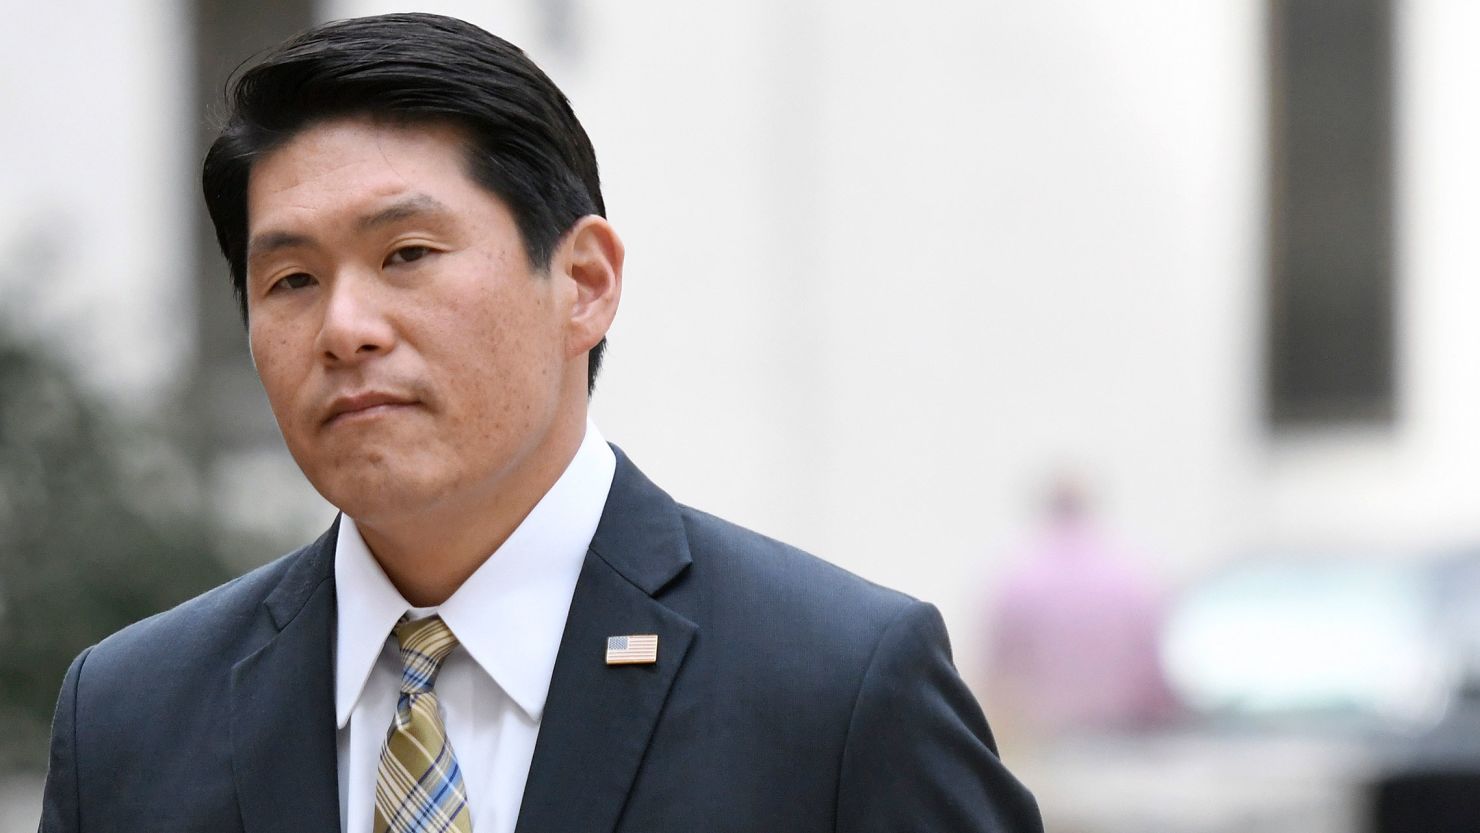 U.S. Attorney Robert Hur arrives at US District Court in Baltimore on November 21, 2019.